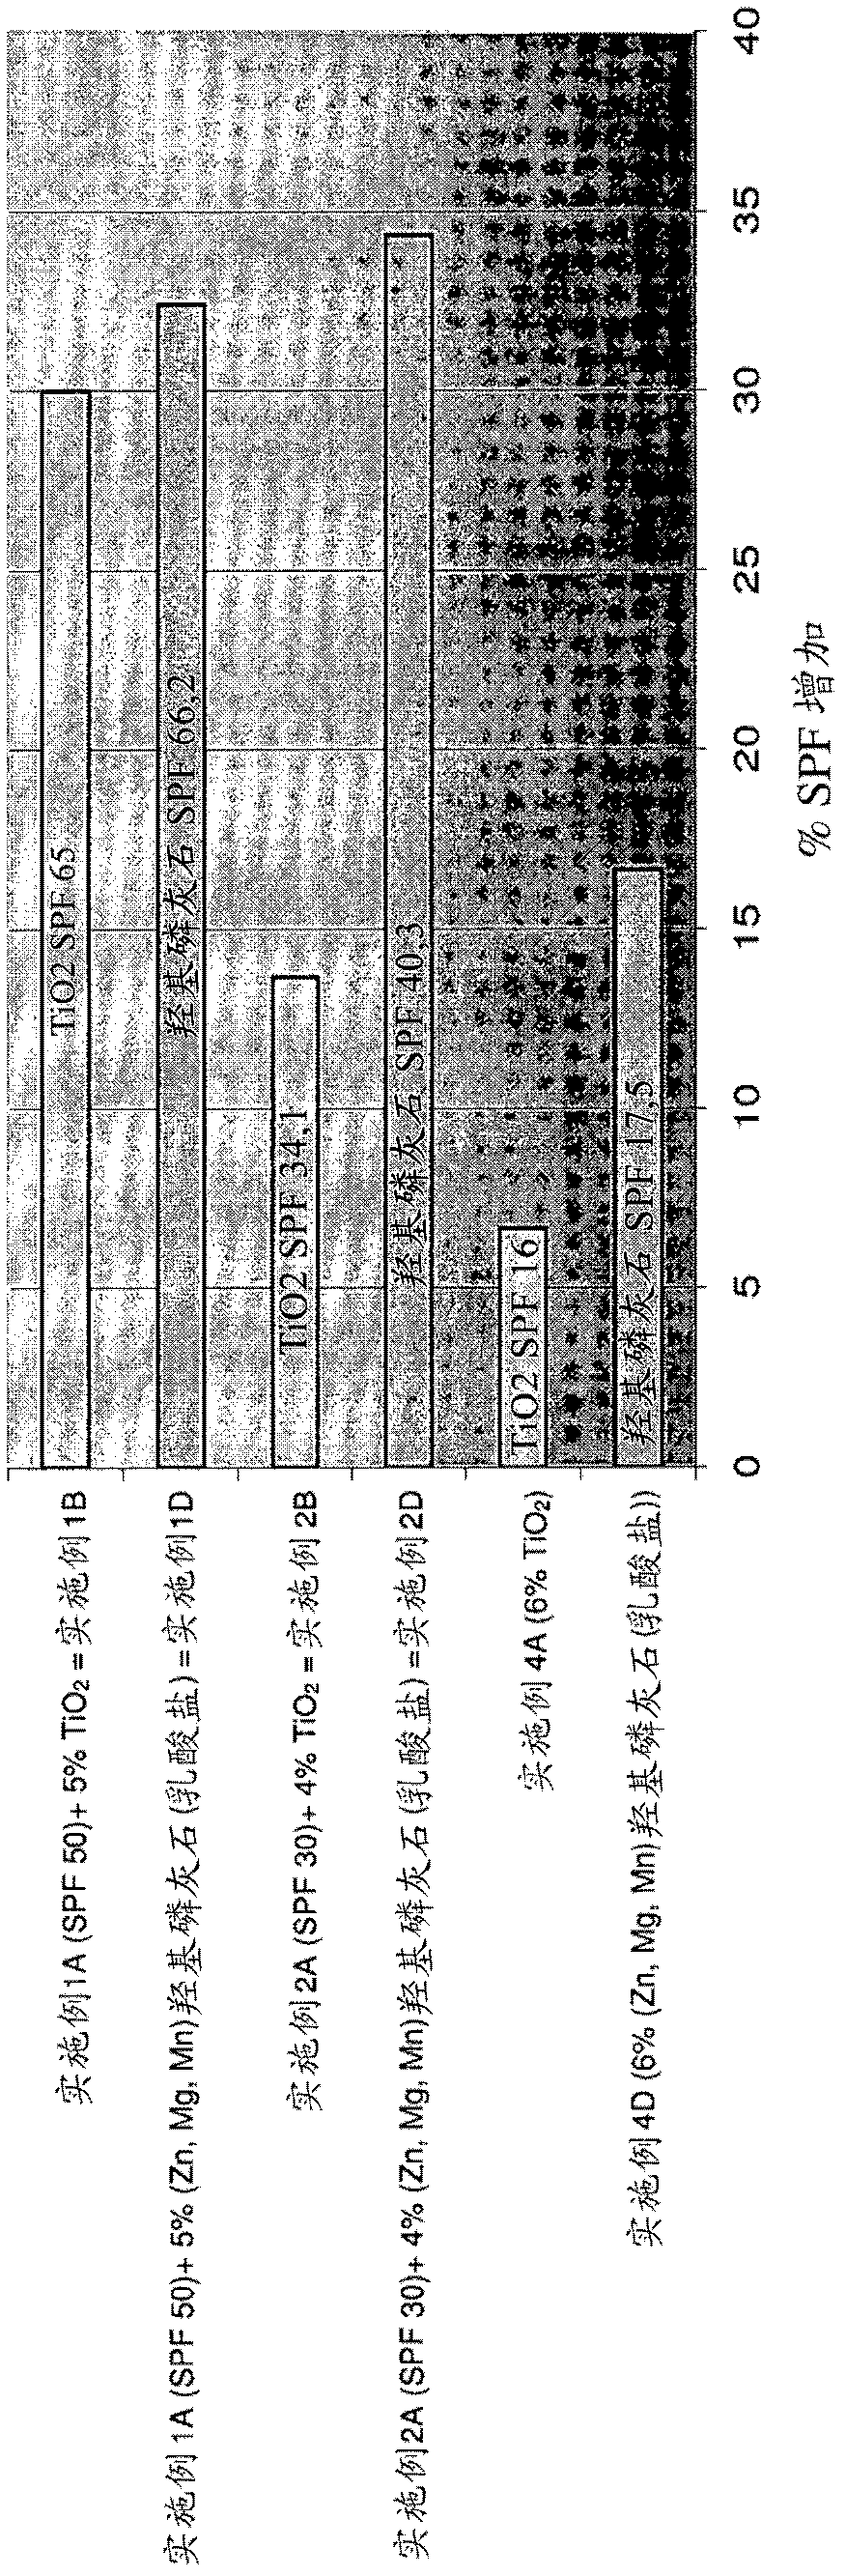 Sunscreen product comprising hydroxyapatite as physical filter